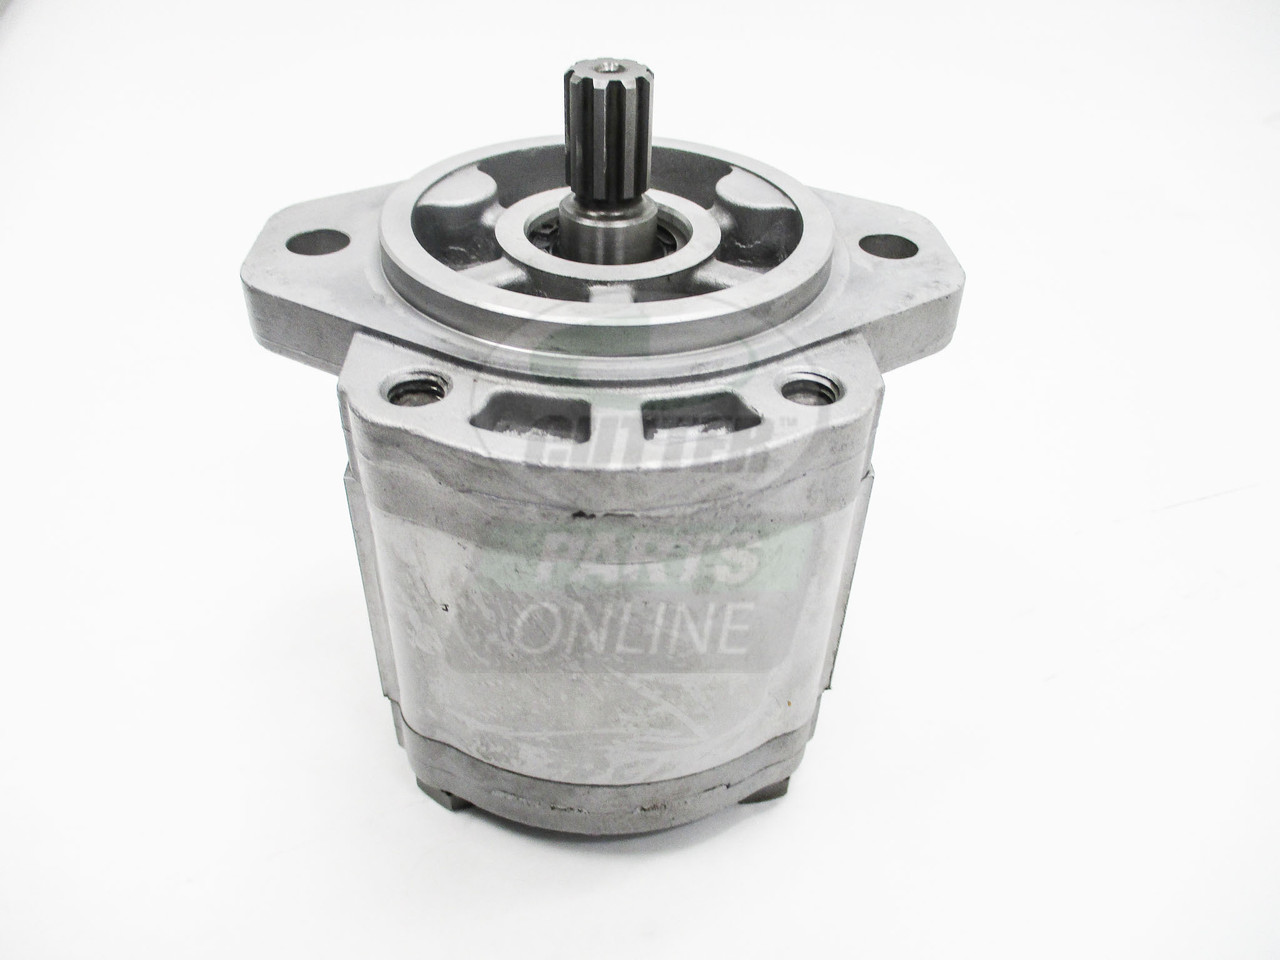 New Hydraulic Gear Pump - Replaces Jacobsen 2701711